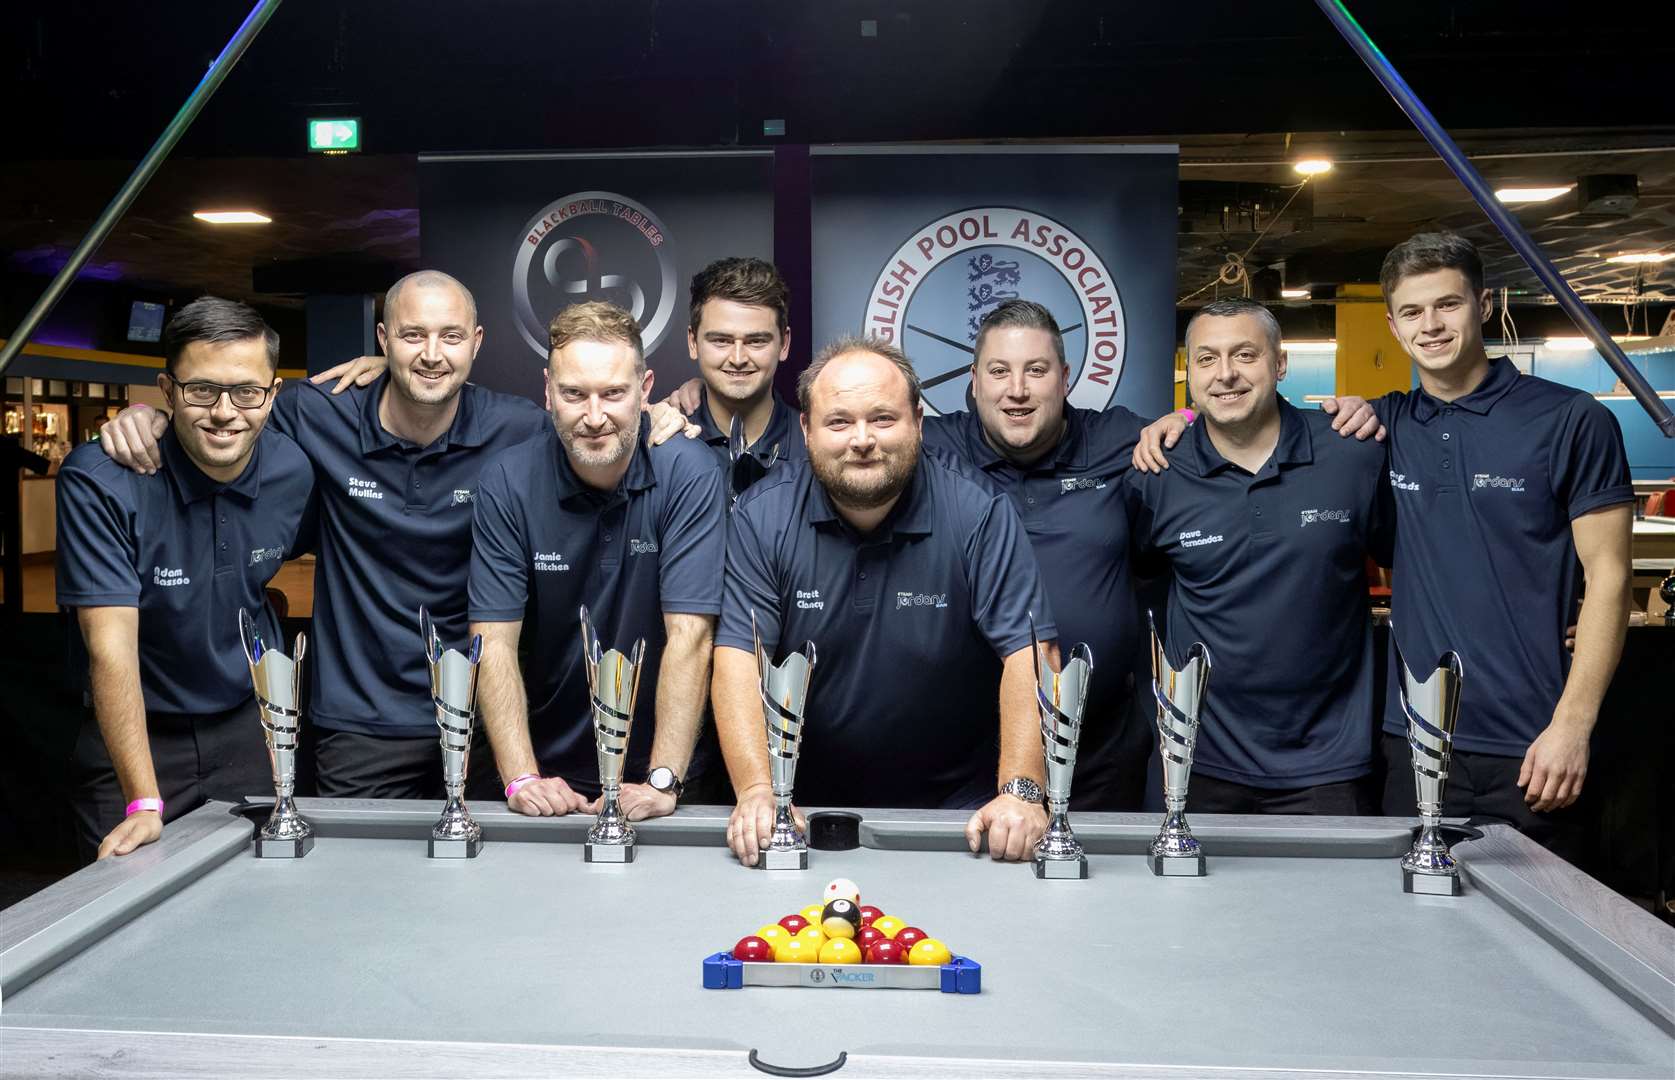 The JPL1 team, from Jordans Bar in Rainham, who are the English Pool Association's Champion of Champions 2023 Picture: Paul Wyatt / English Pool Association